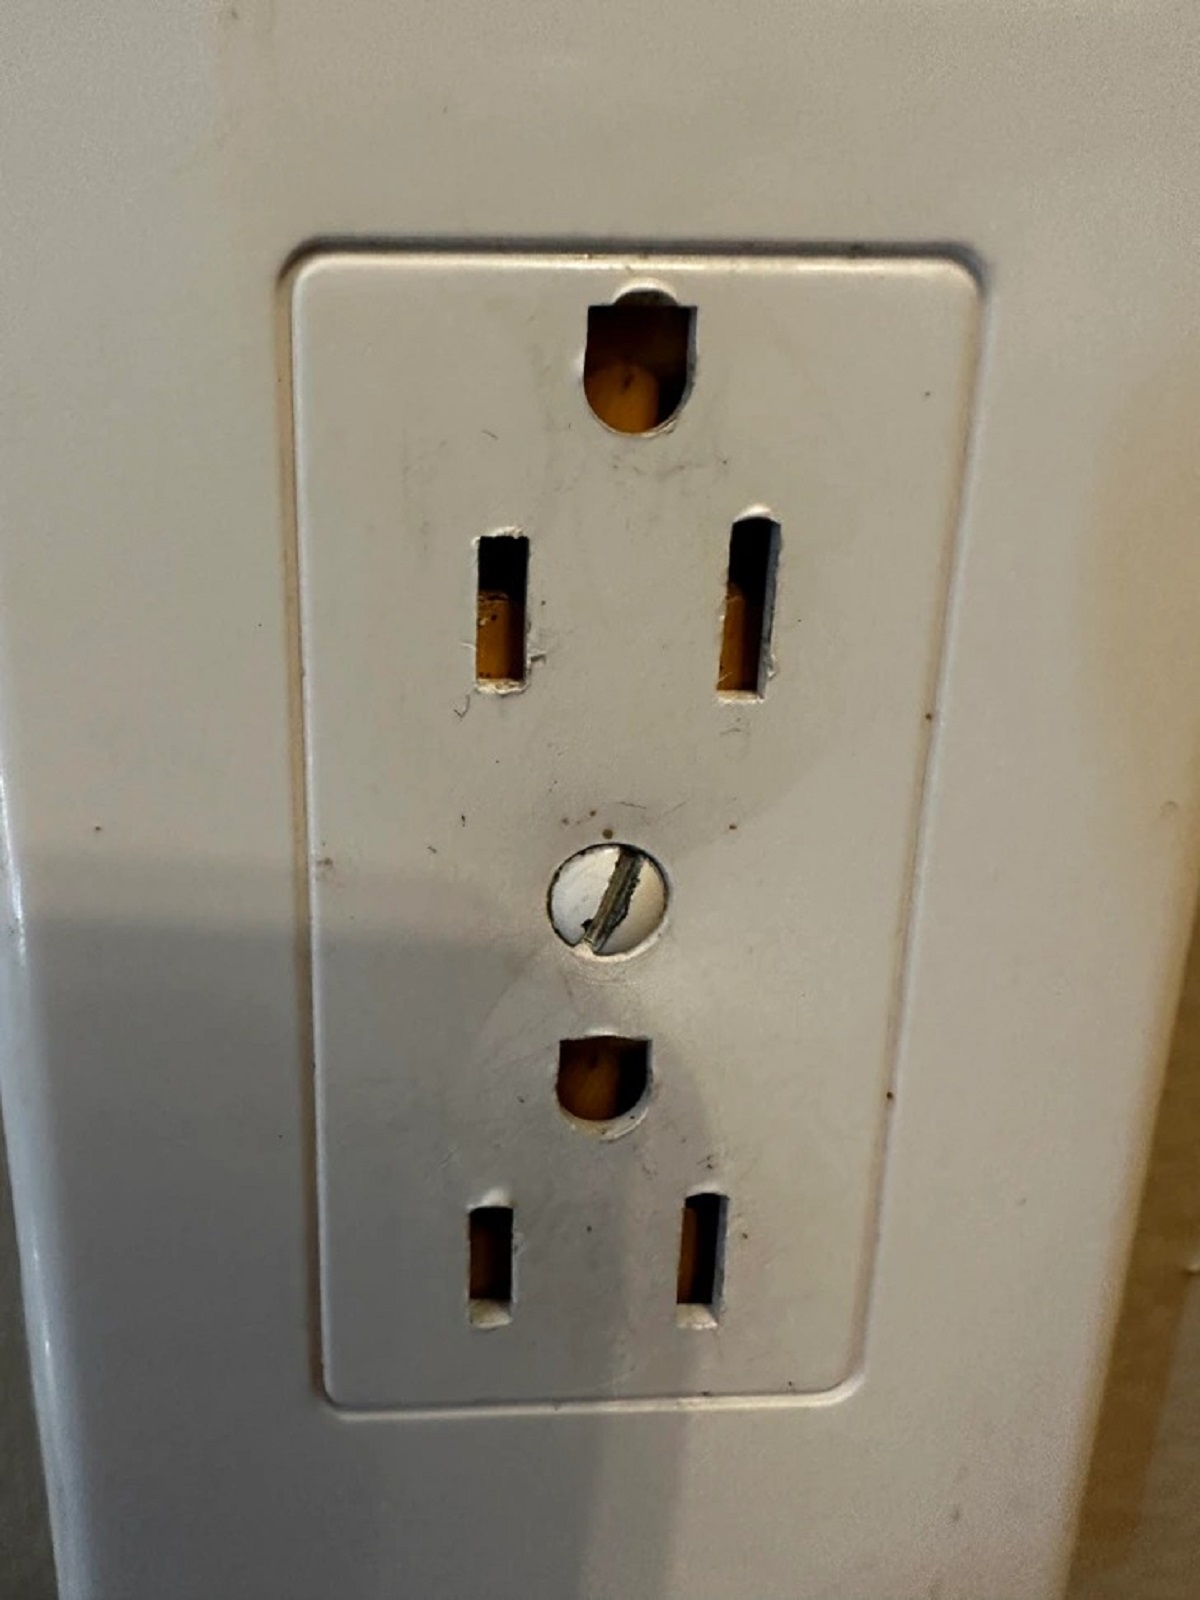 “Multiple outlets in the new house I’m renting don’t let you plug anything in.”